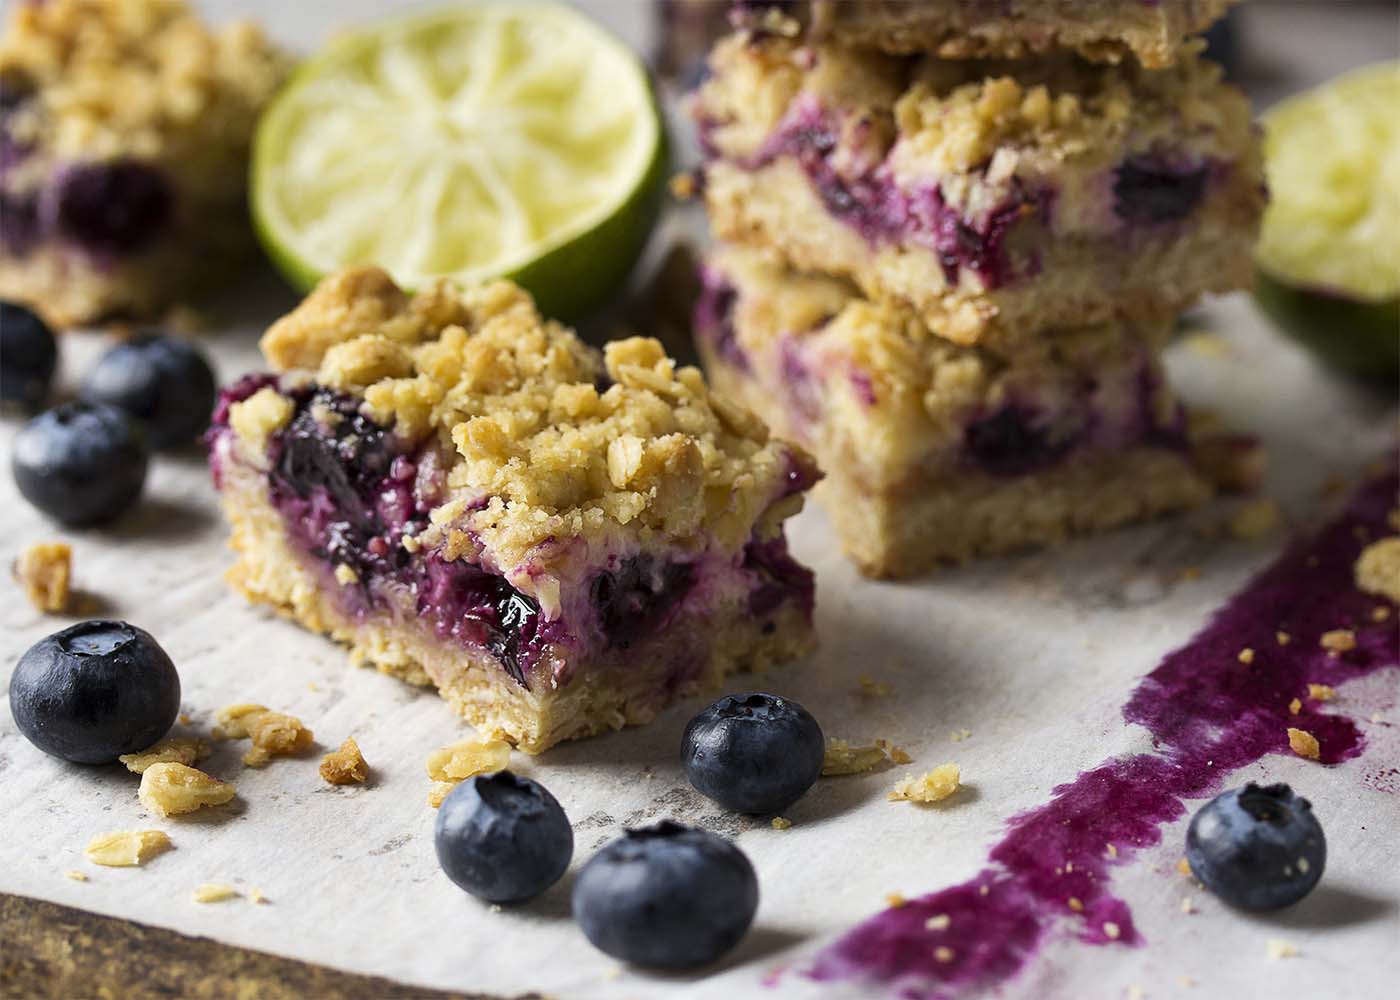 One blueberry lime oatmeal bar on parchment paper. Blueberries, crumbs, and other bars scattered about.